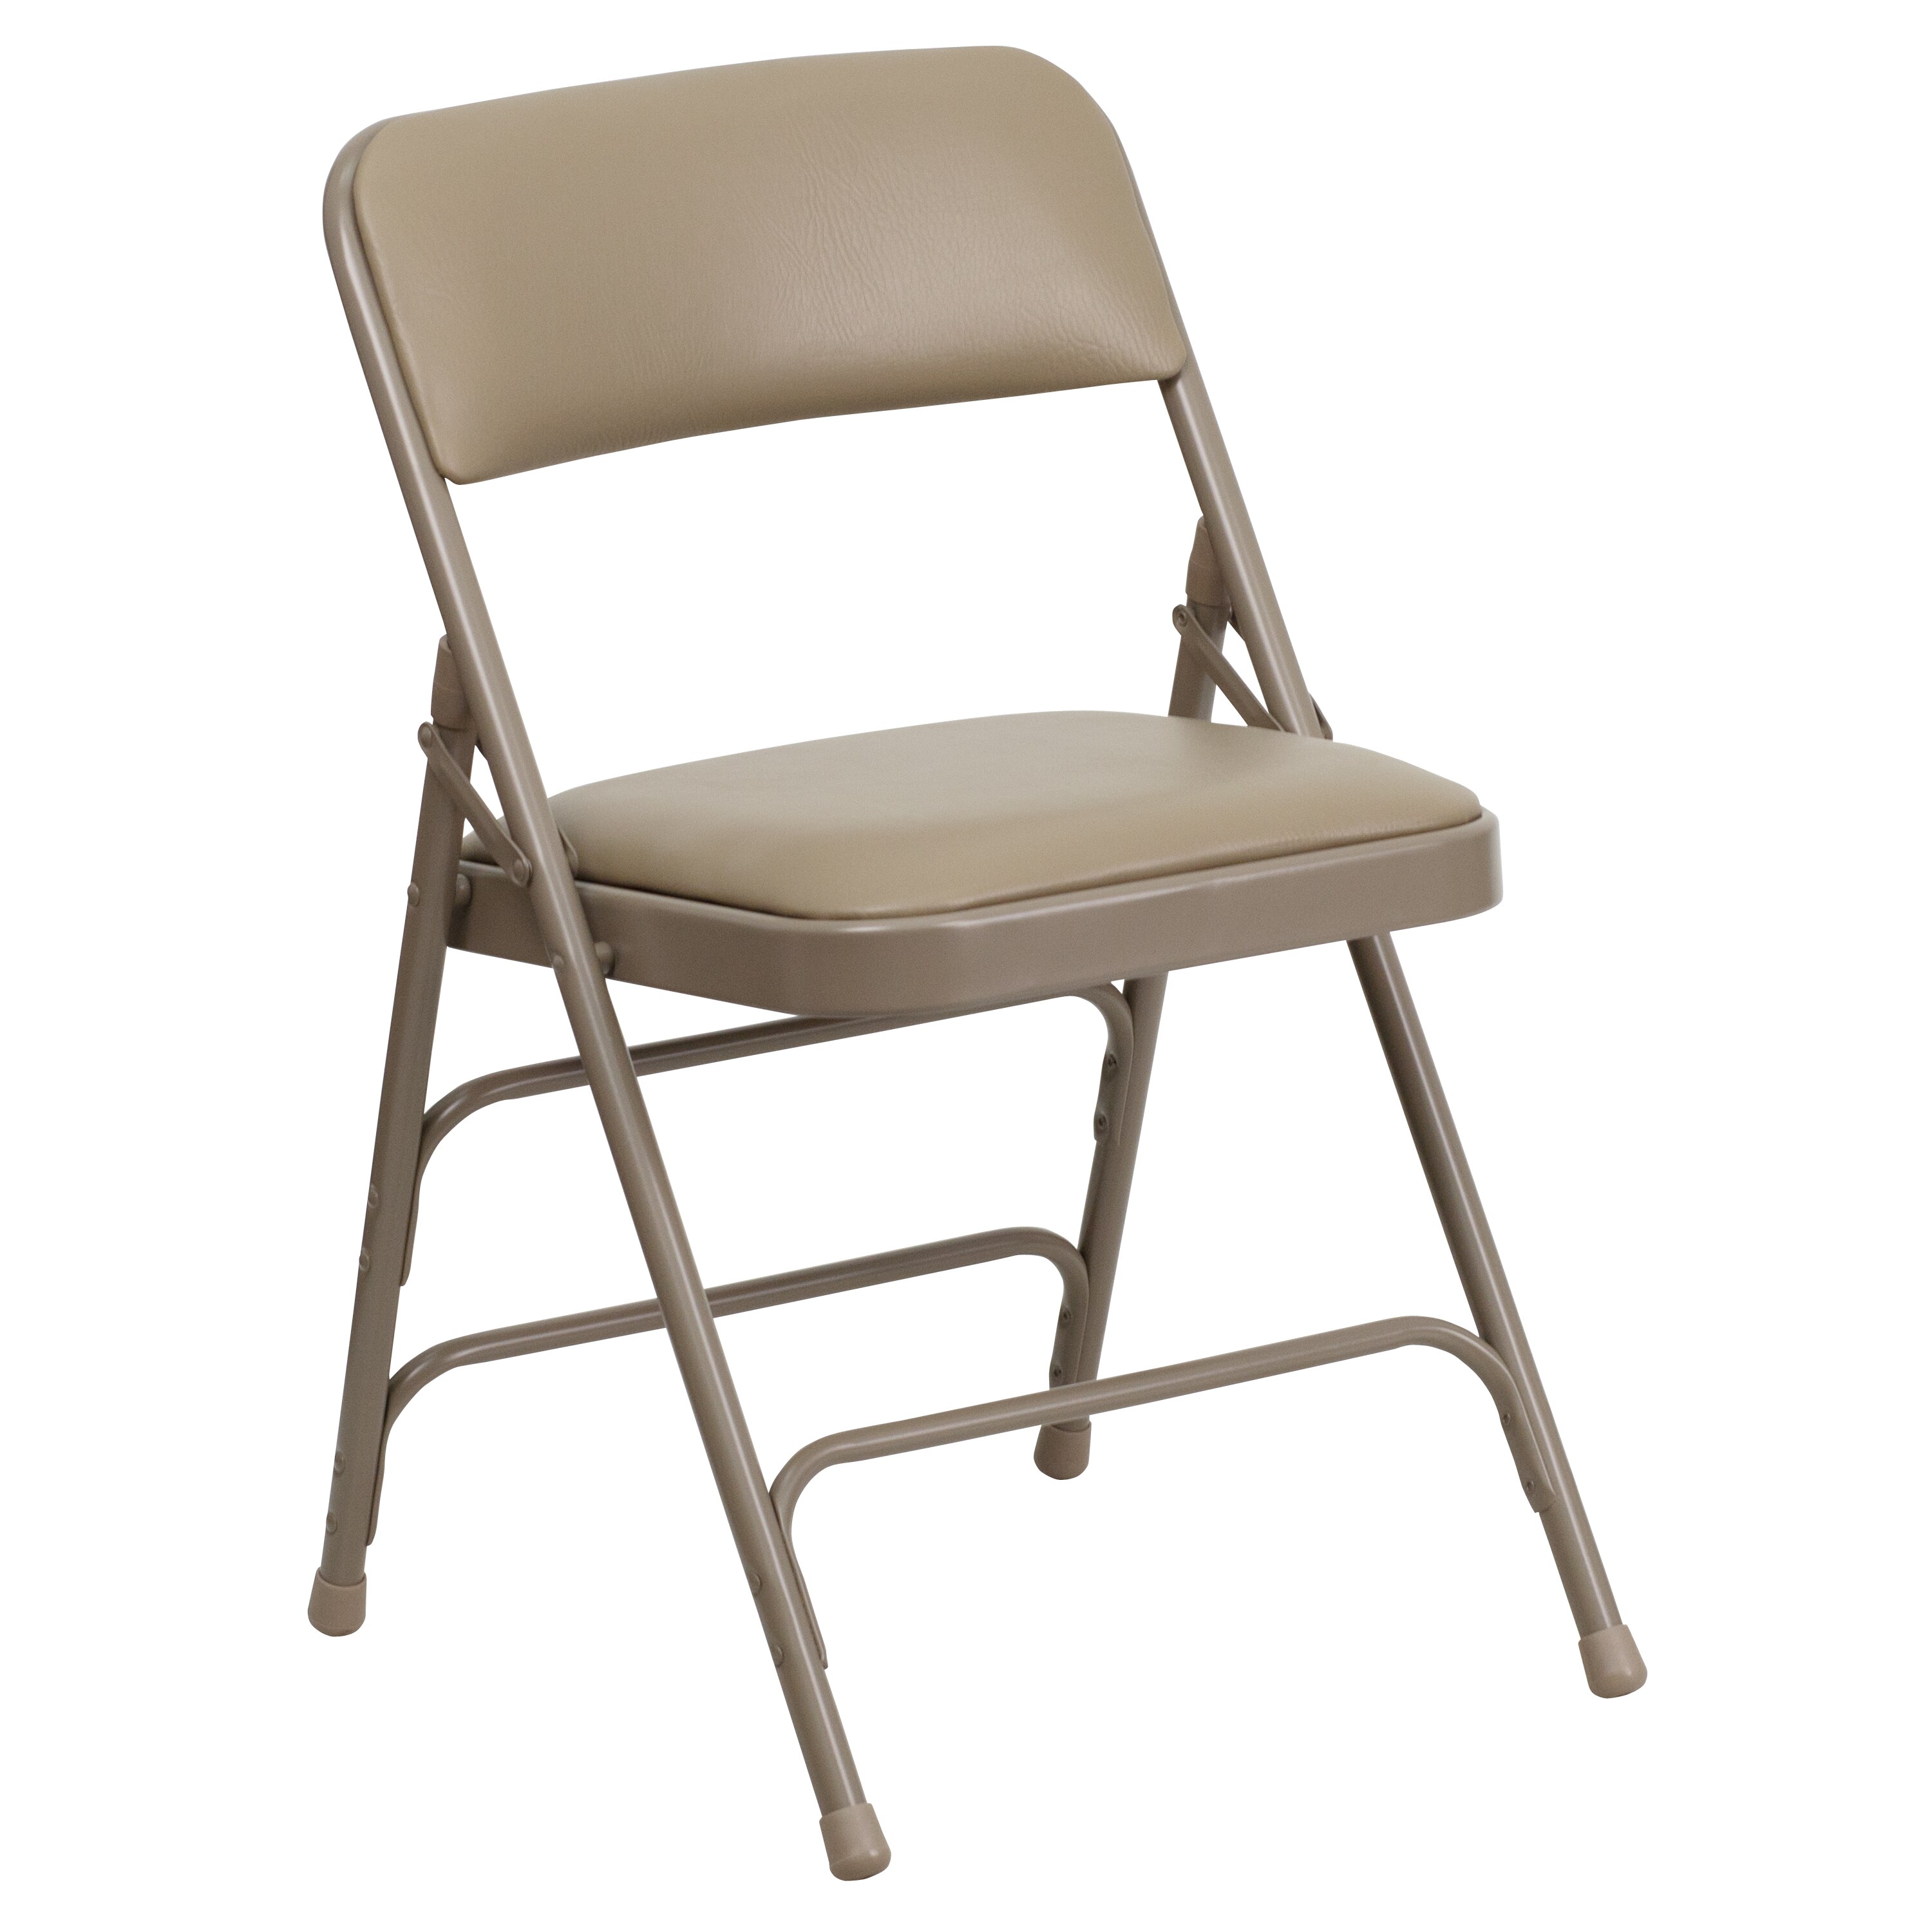 4 PACK Metal Folding Chair Beige Frame Finish Double Braced Commercial Quality 